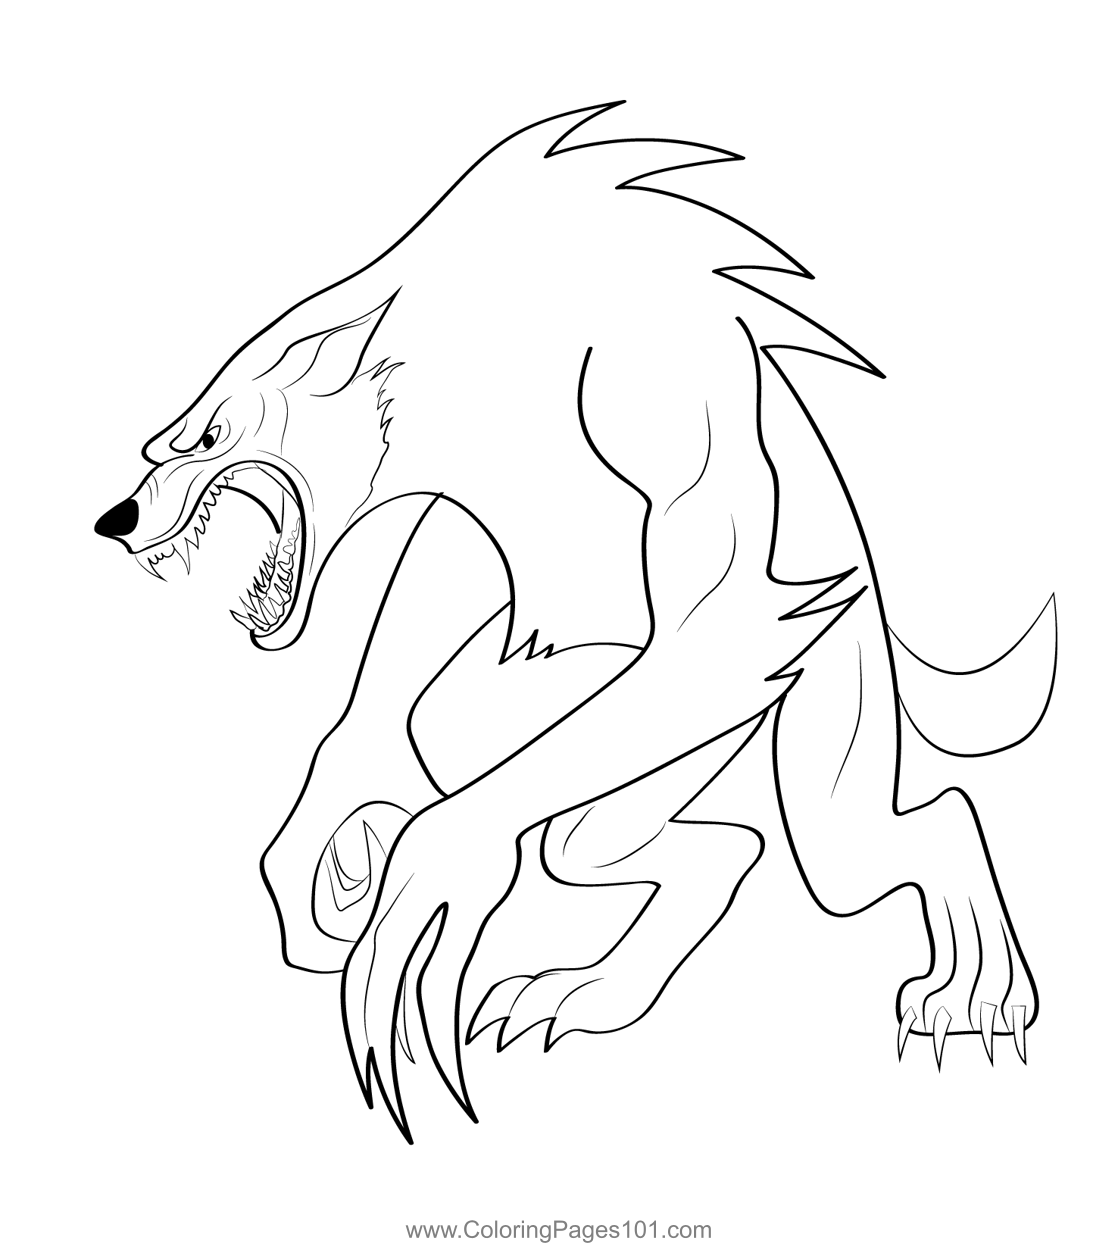 werewolf5-coloring-page-for-kids-free-werewolves-printable-coloring